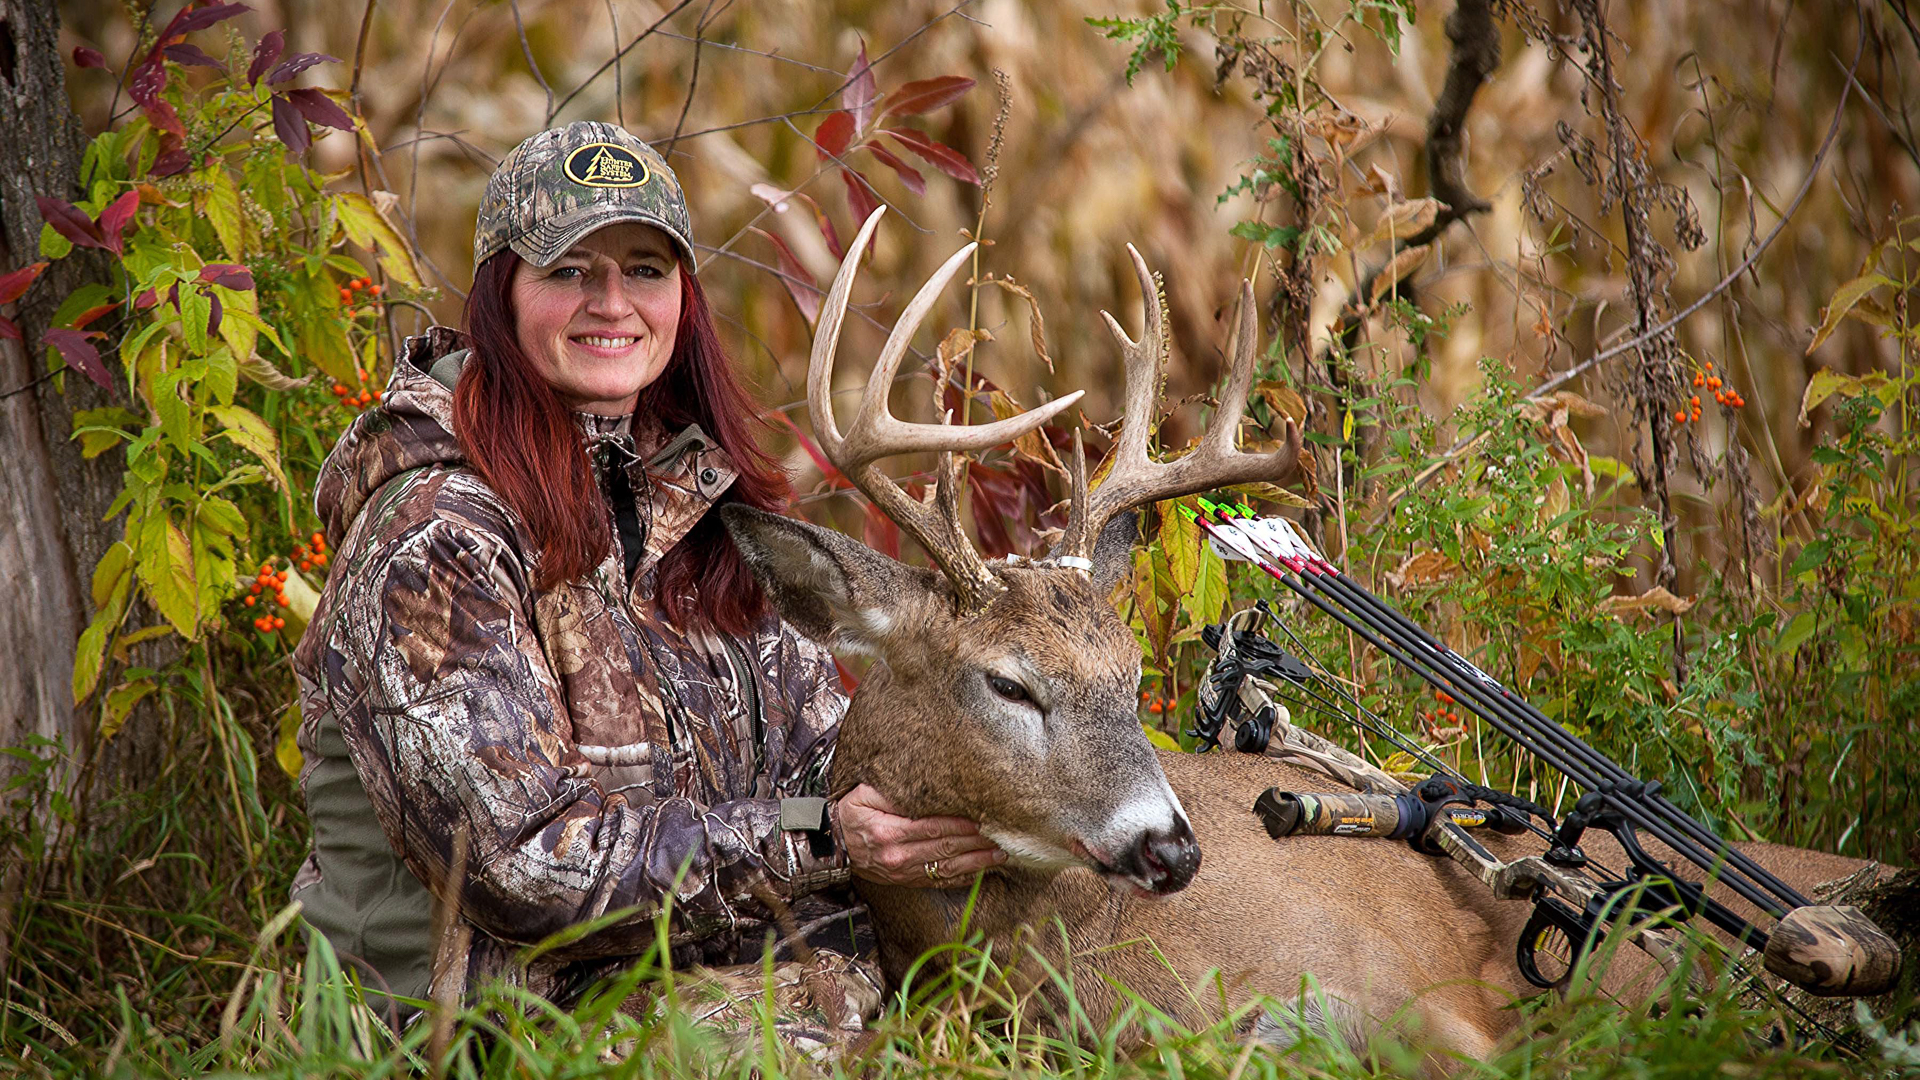 Much Of The Bowhunting World Envies U.s. Hunting